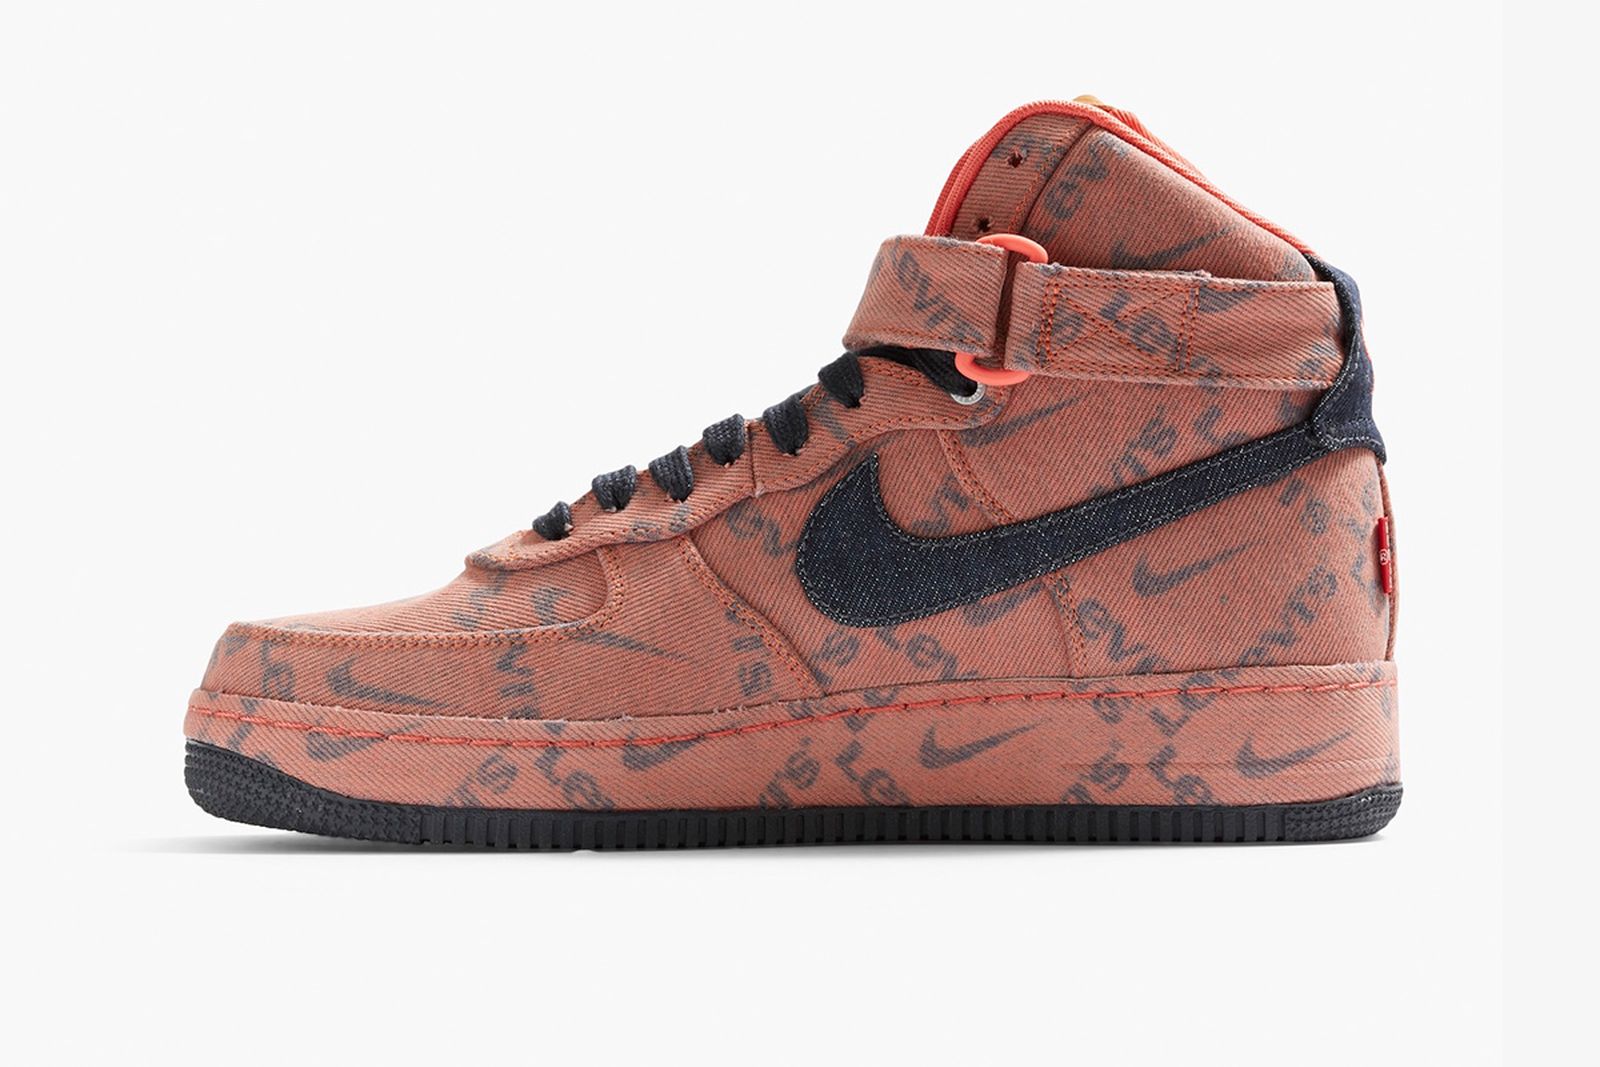 in stand houden Resistent Halve cirkel Levi's x Nike Air Force 1: Official Images & Release Information